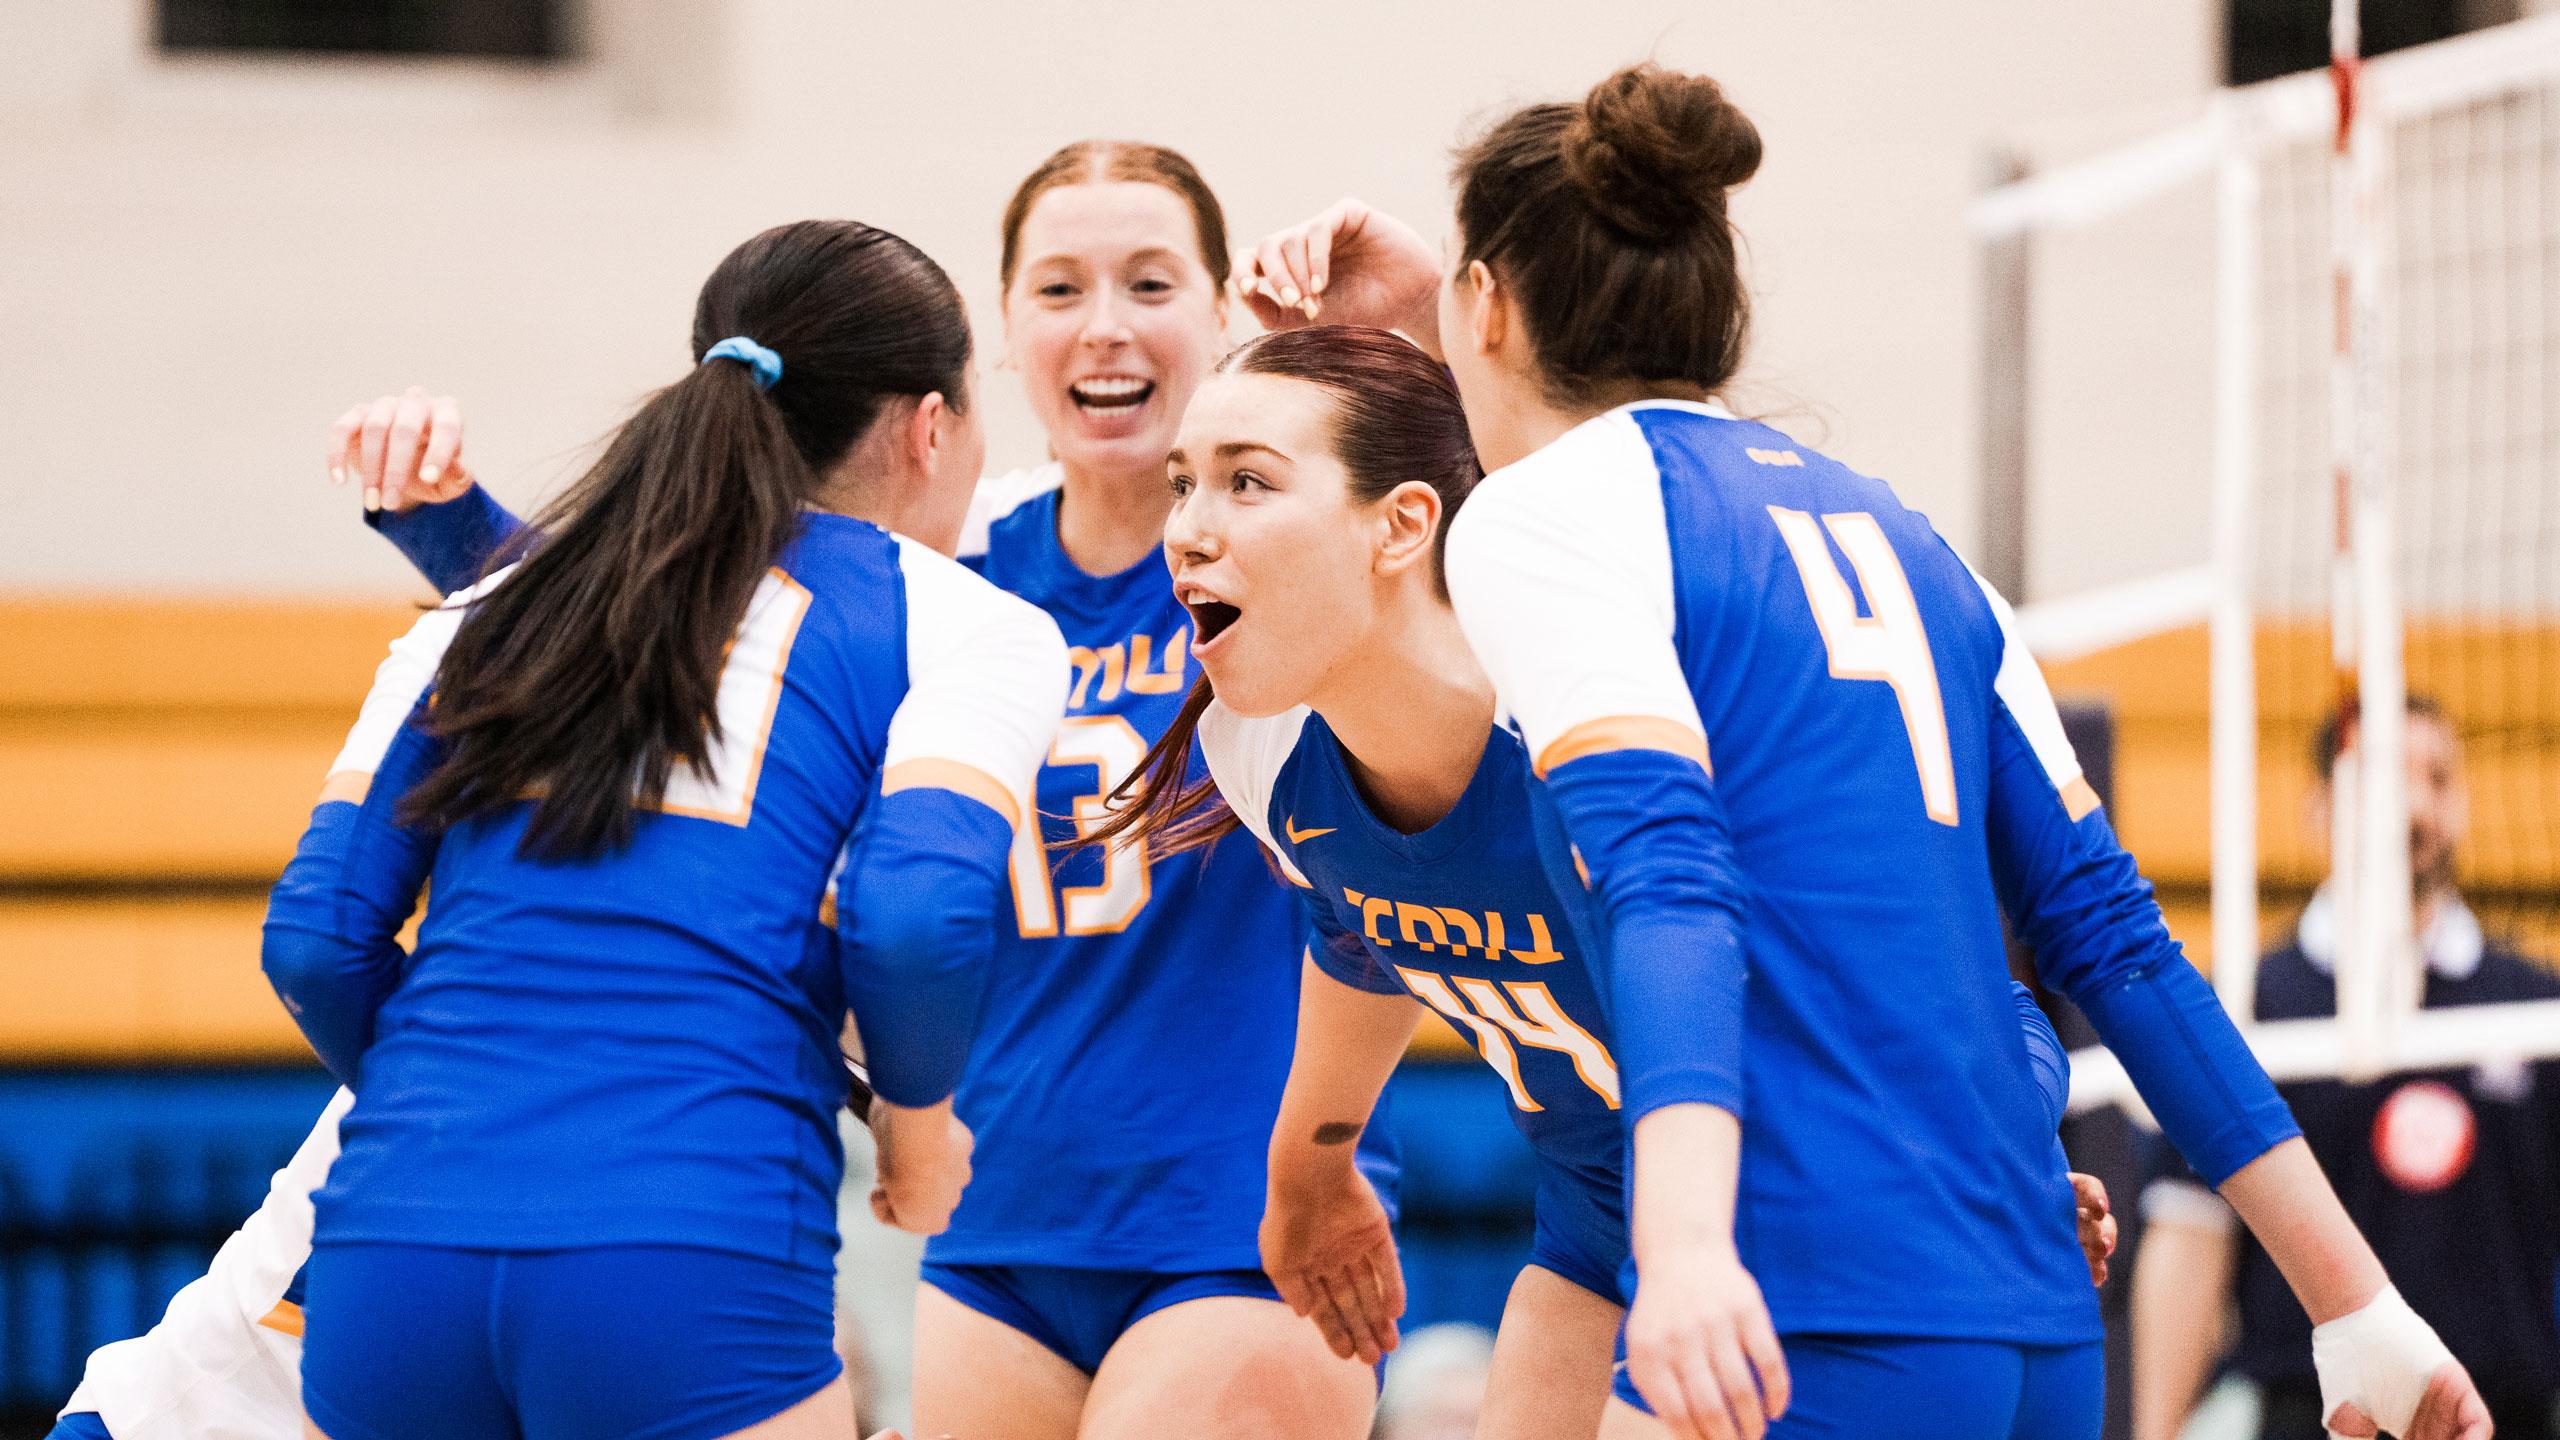 TMU women's volleyball players in blue jerseys celebrate a point